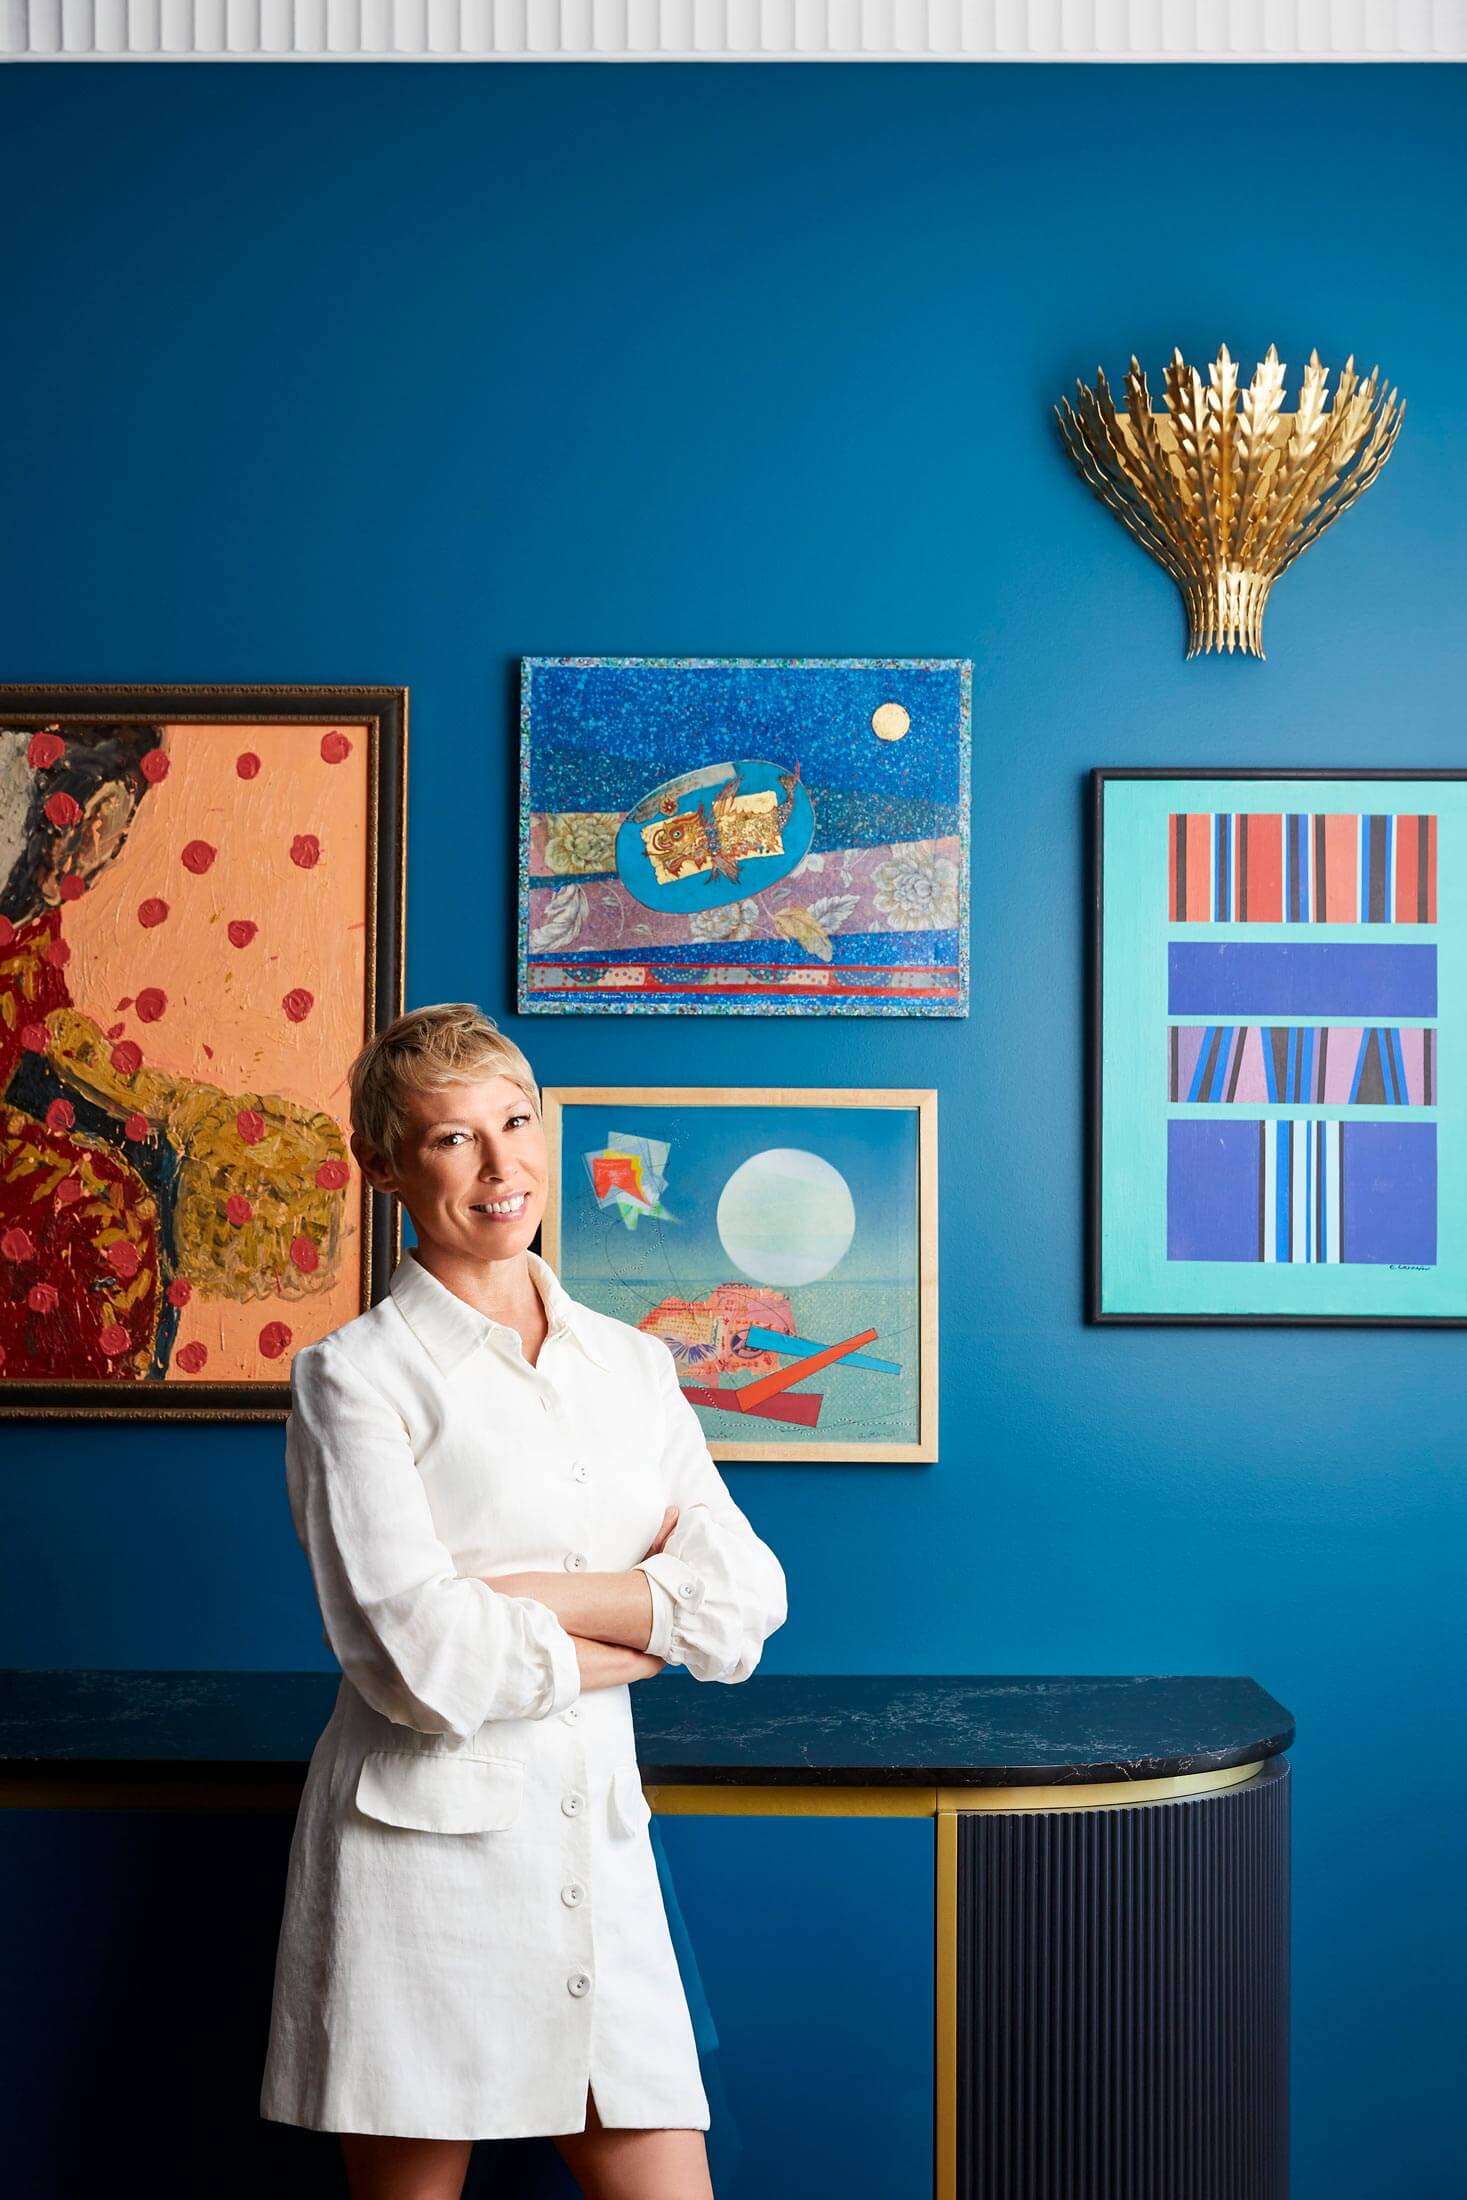 Denby Dowling is a Sydney based Interior Designer specialising in bespoke residential and boutique commercial projects.